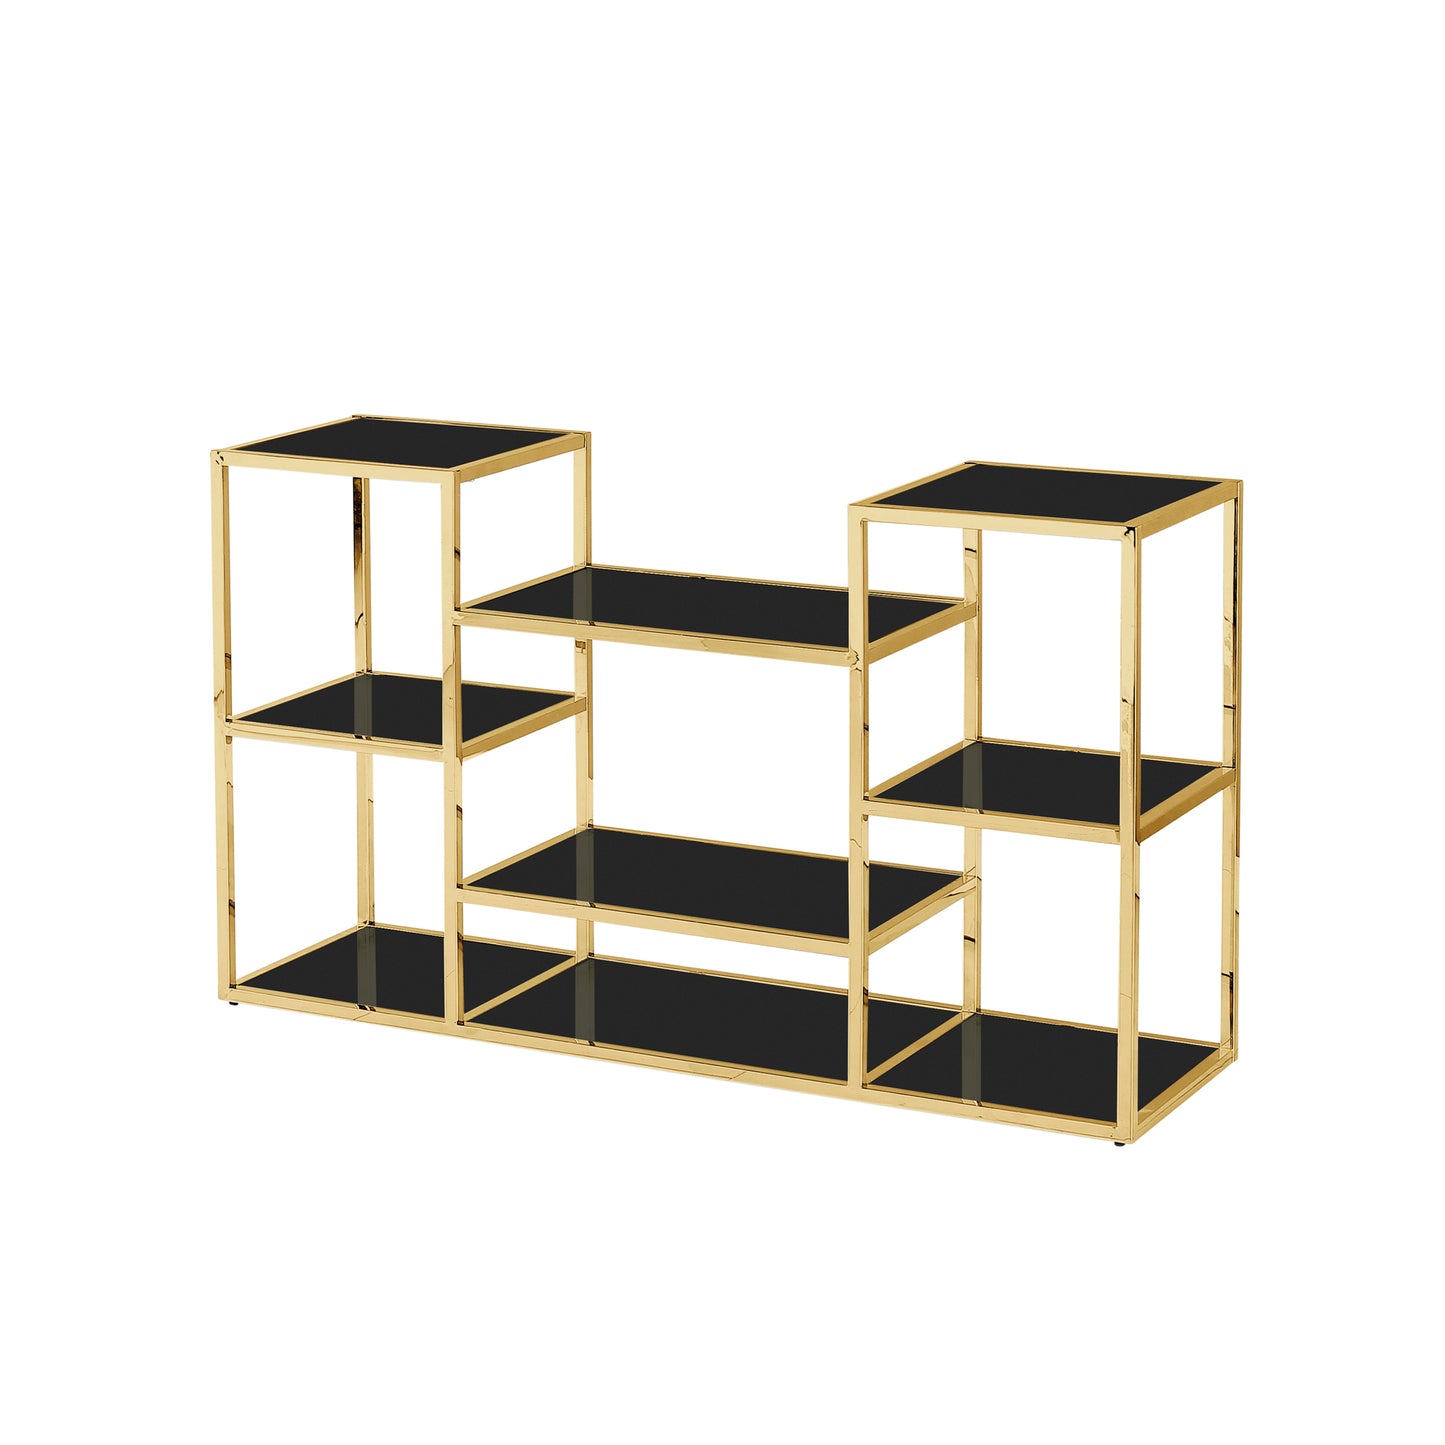 STAINLESS STEEL CONSOLE TABLE,GOLD/BLACK GLASS